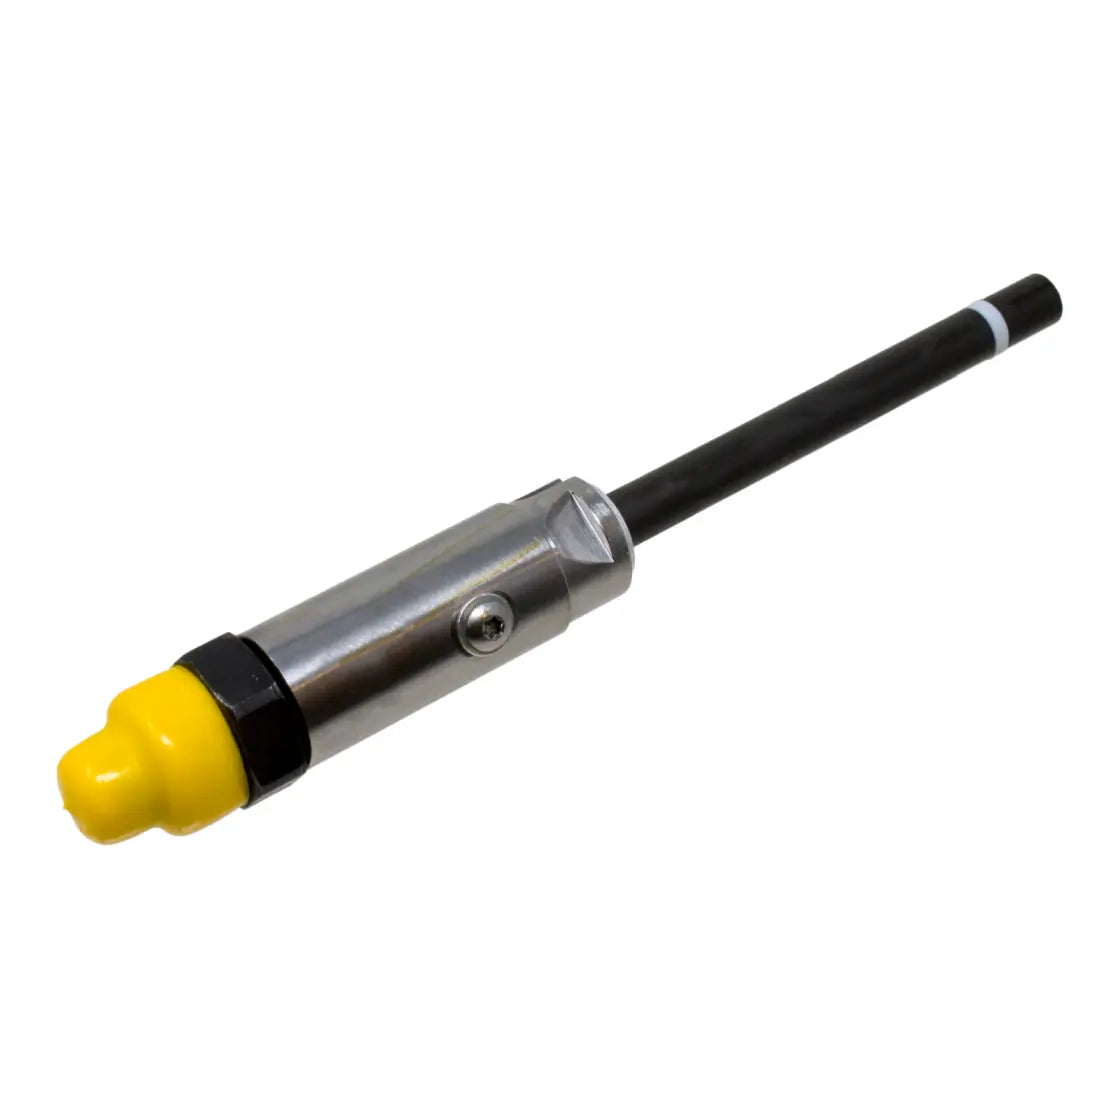 Duraforce 8N-7005, Fuel Injector Pencil Nozzle Assembly For Caterpillar